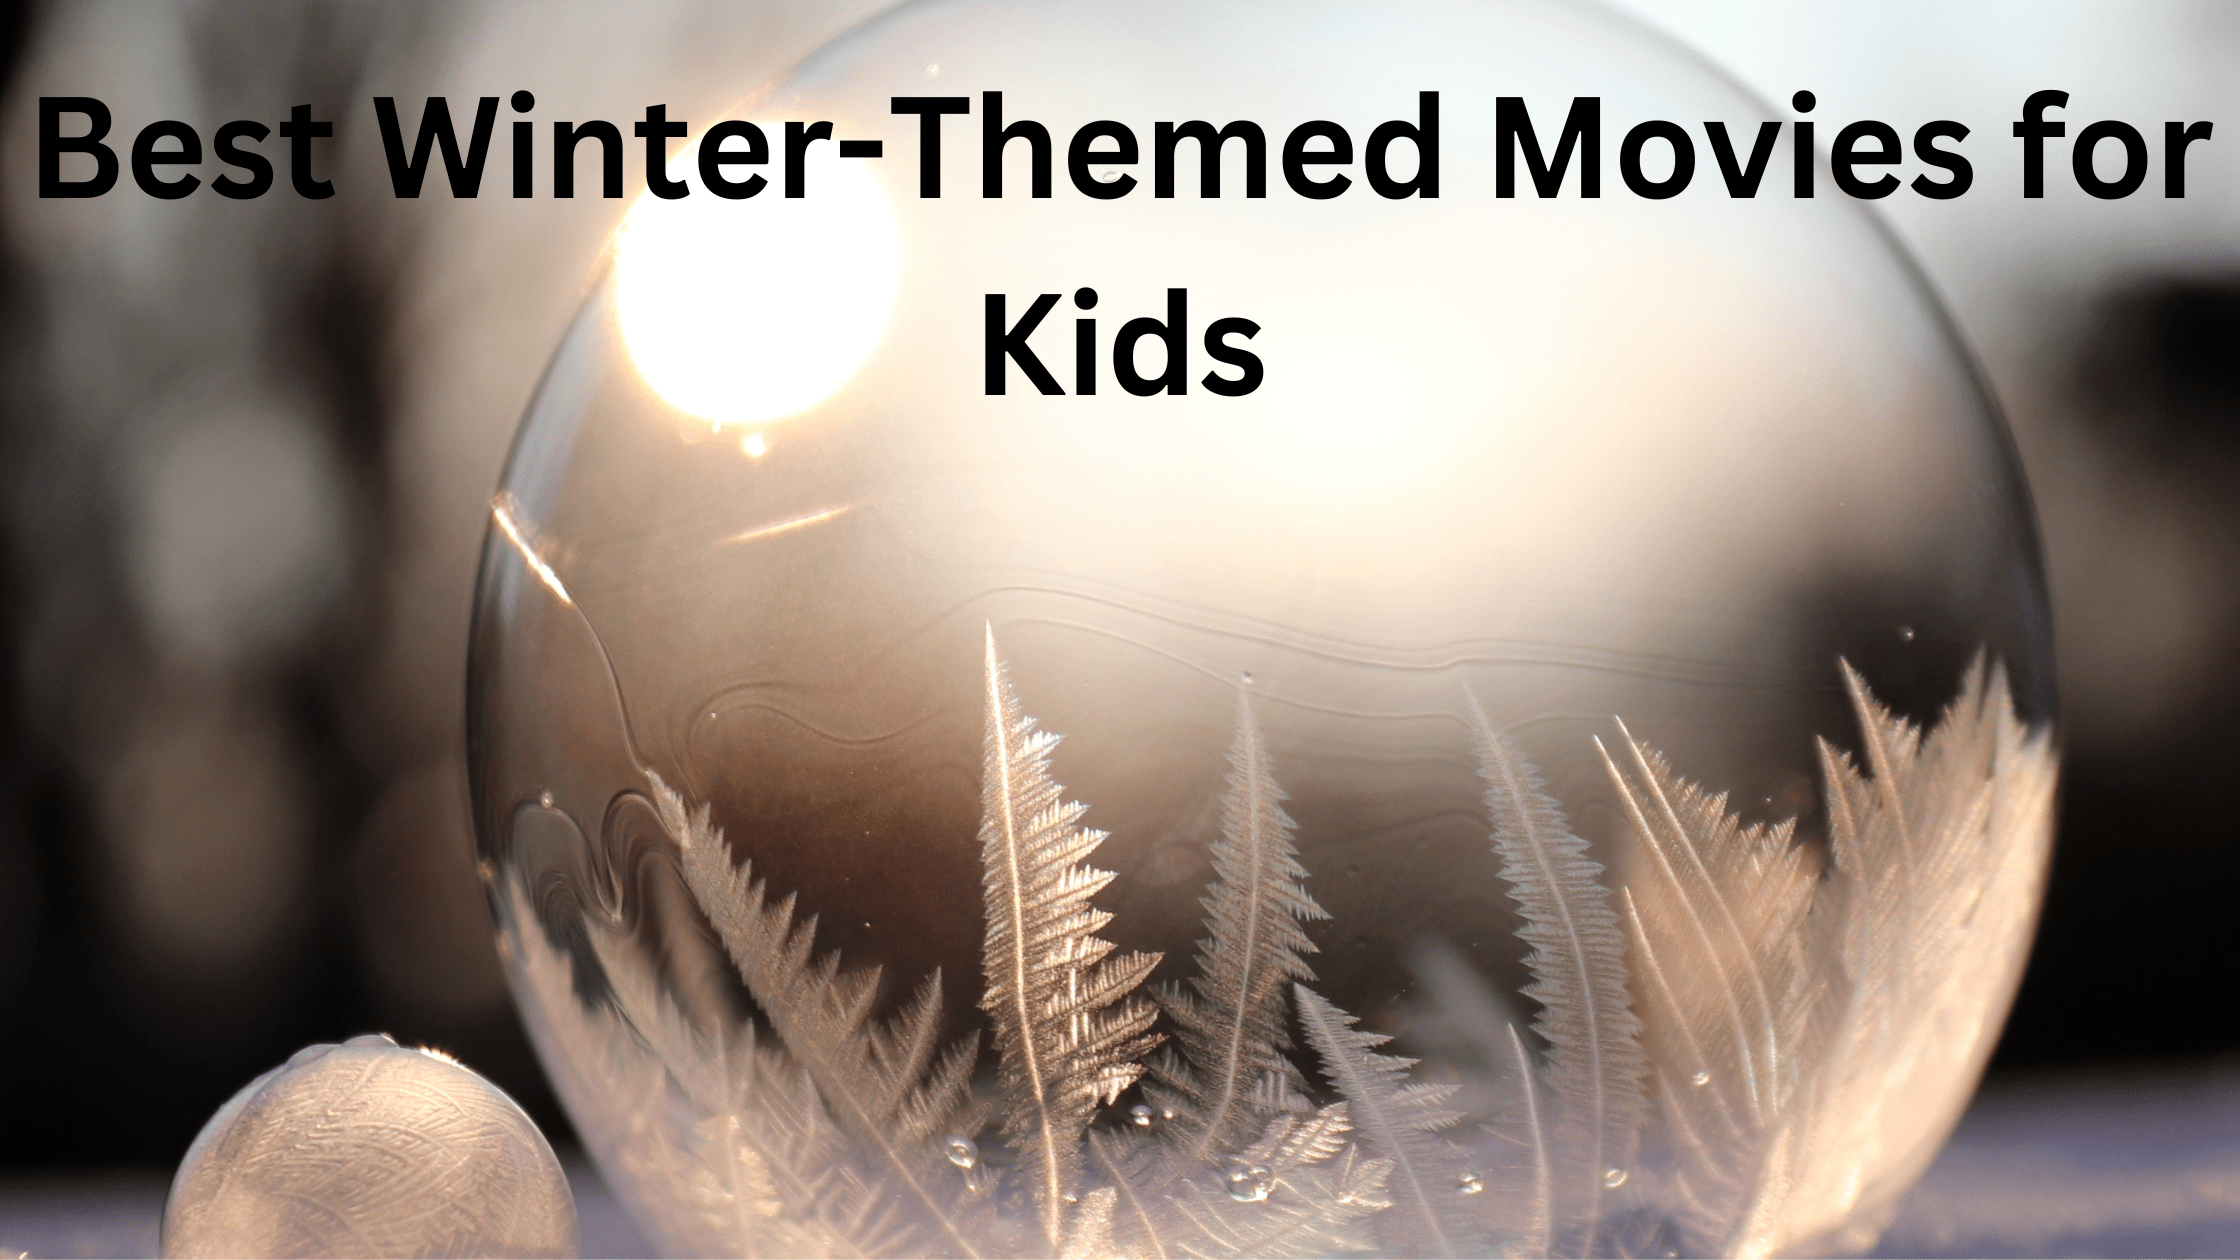 11 Best Winter-Themed Movies for Kids to Watch 3